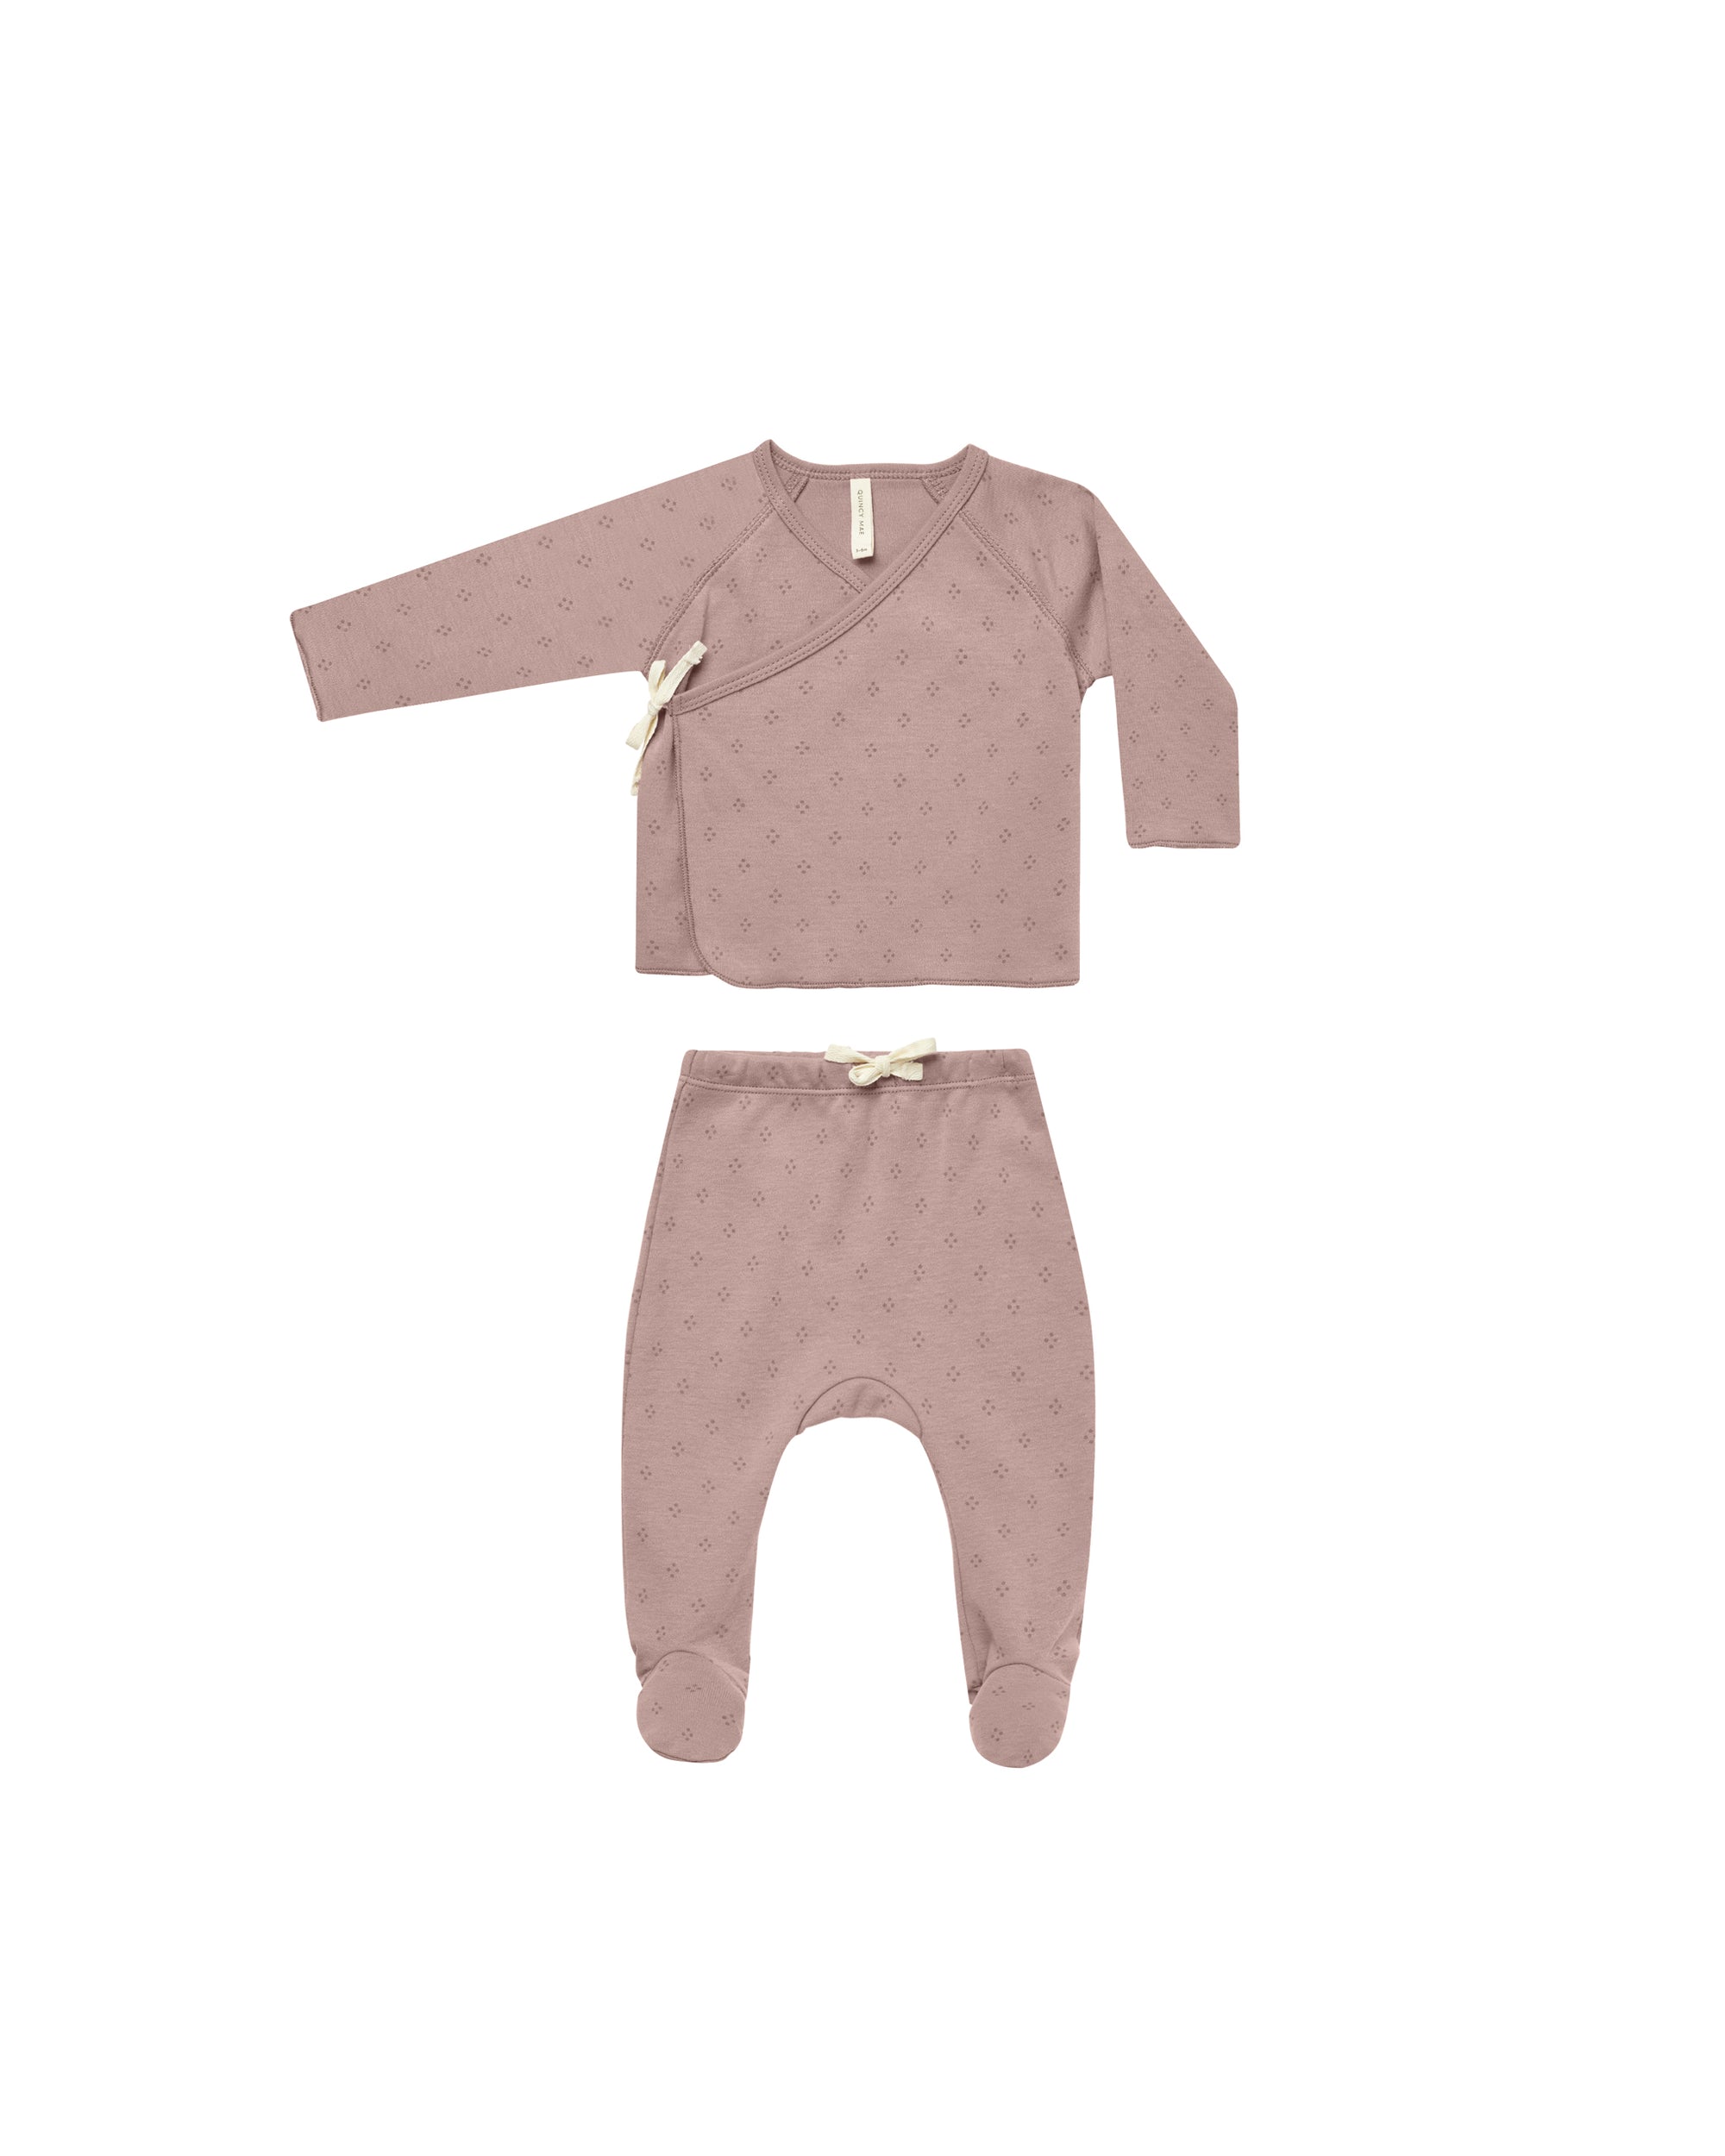 Quincy Mae | Wrap Top + Footed Pant Set || Dotty